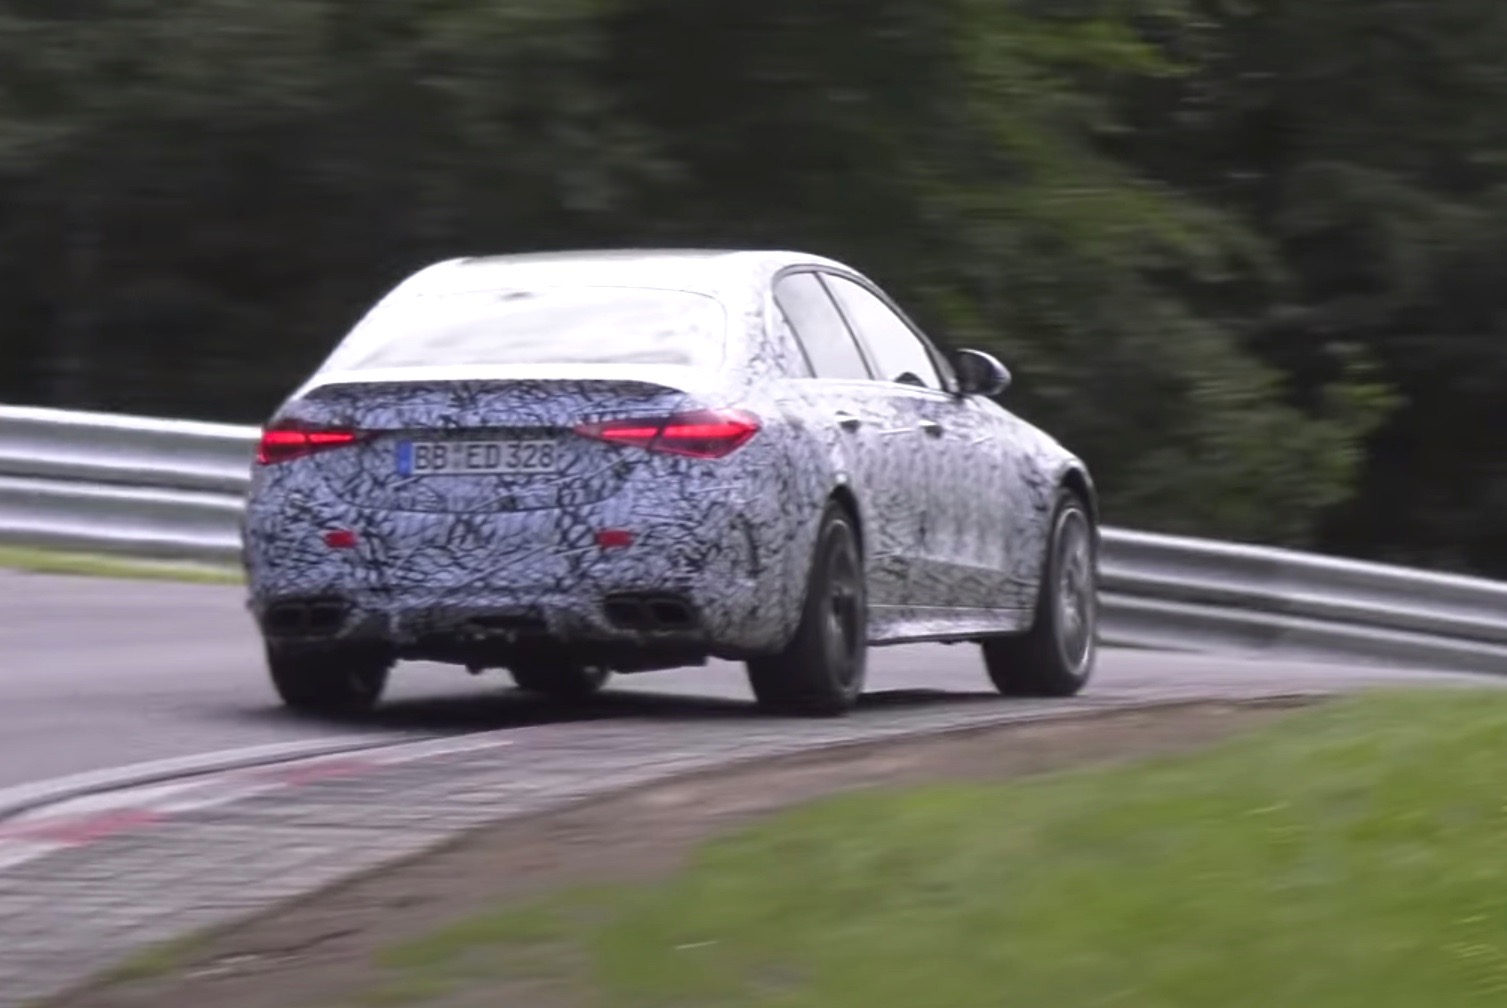 2022 Mercedes-AMG C63 2.0T hybrid spotted, looks extremely quick (video)